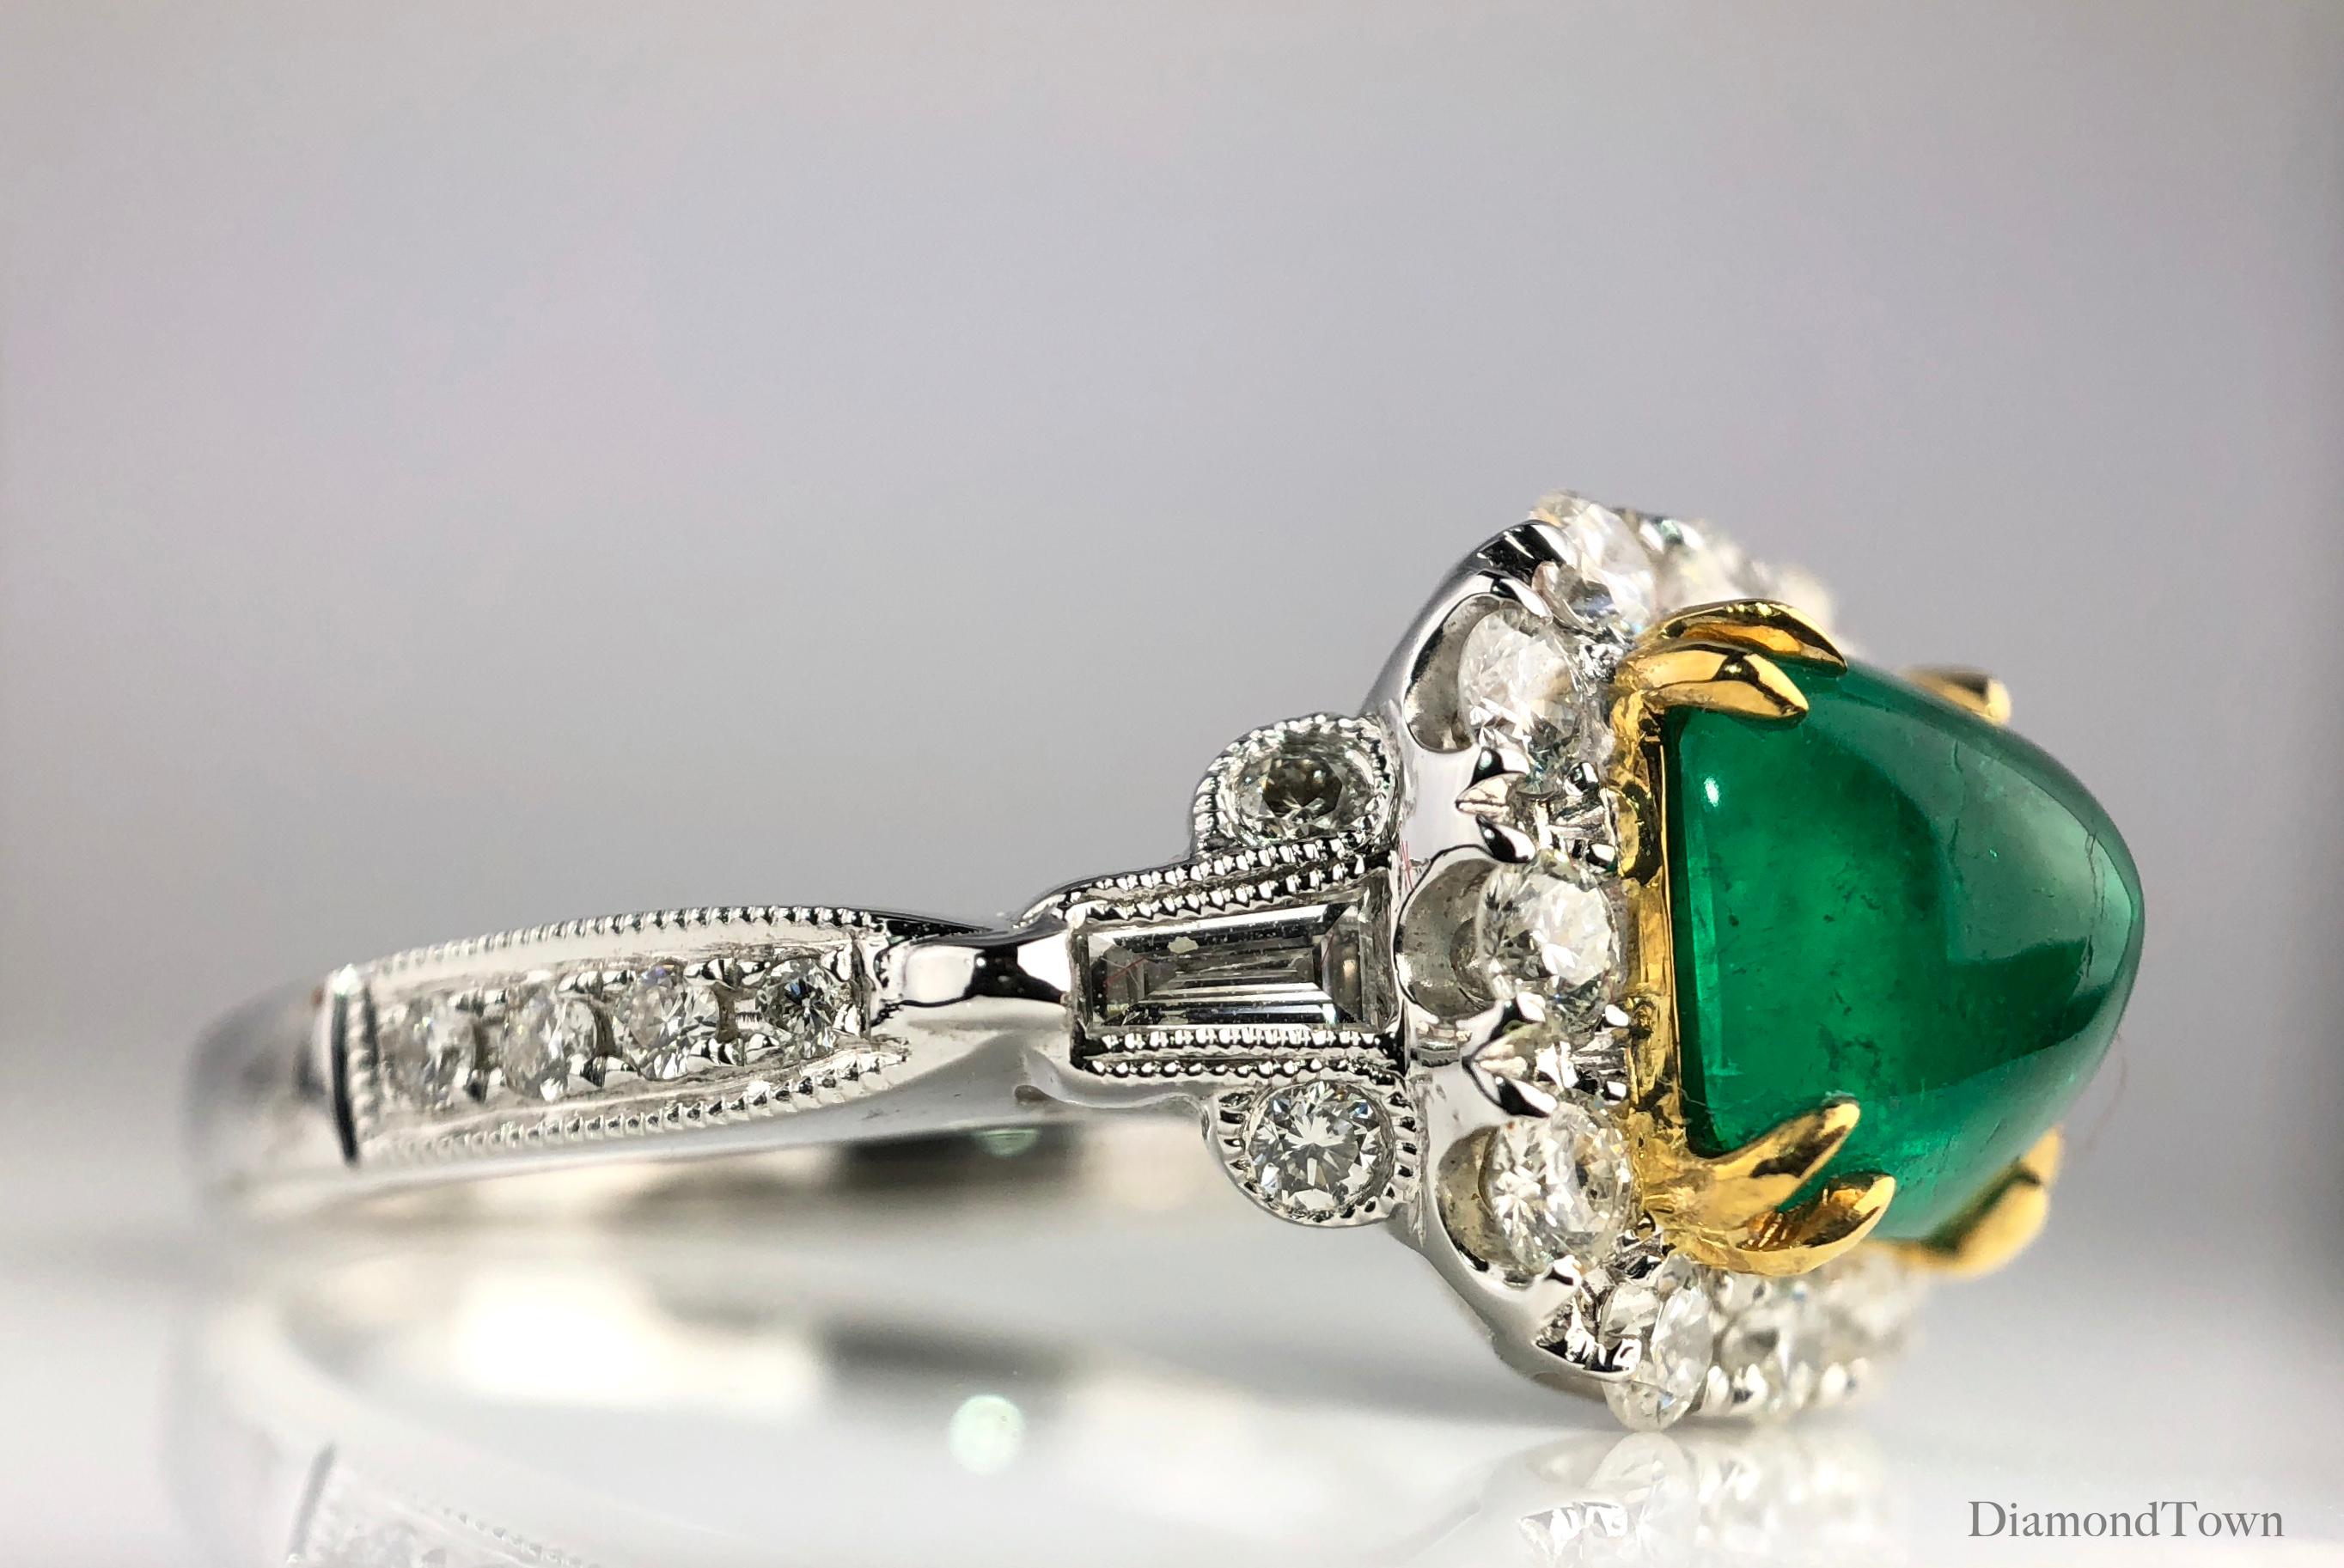 Contemporary DiamondTown 1.45 Carat Sugarloaf Emerald and Diamond Ring in 18k Gold